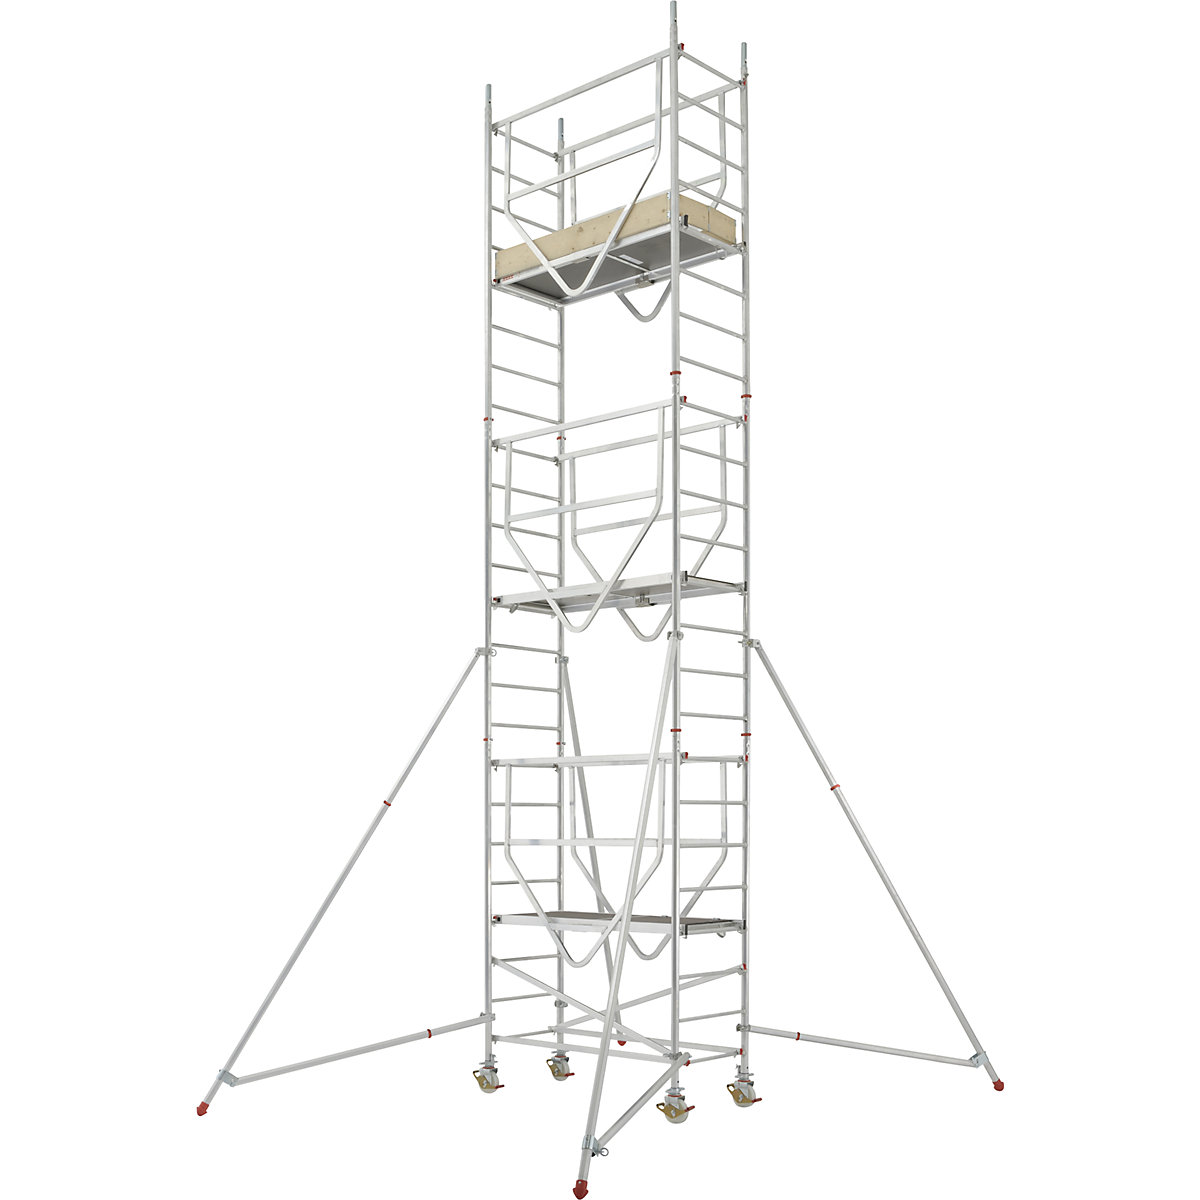 ADVANCED SAFE-T 7070 mobile access tower – HYMER, welded, platform 1.58 x 0.61 m, module 1+2+3-8